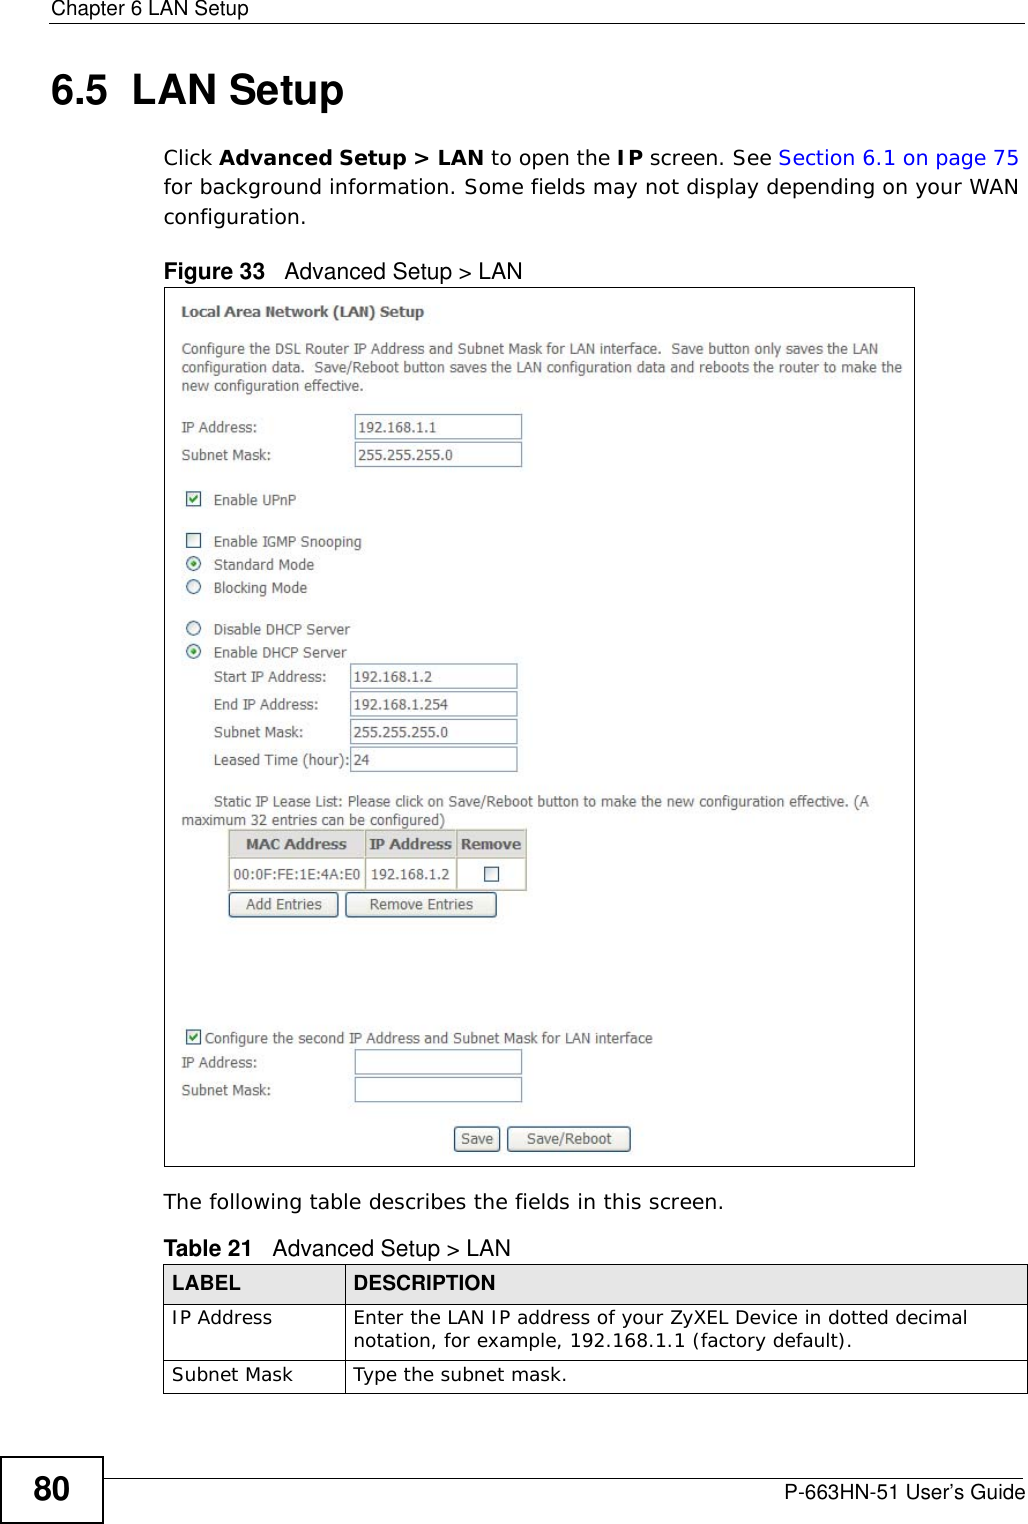 Chapter 6 LAN SetupP-663HN-51 User’s Guide806.5  LAN SetupClick Advanced Setup &gt; LAN to open the IP screen. See Section 6.1 on page 75 for background information. Some fields may not display depending on your WAN configuration.Figure 33   Advanced Setup &gt; LAN The following table describes the fields in this screen.  Table 21   Advanced Setup &gt; LANLABEL DESCRIPTIONIP Address Enter the LAN IP address of your ZyXEL Device in dotted decimal notation, for example, 192.168.1.1 (factory default). Subnet Mask  Type the subnet mask.